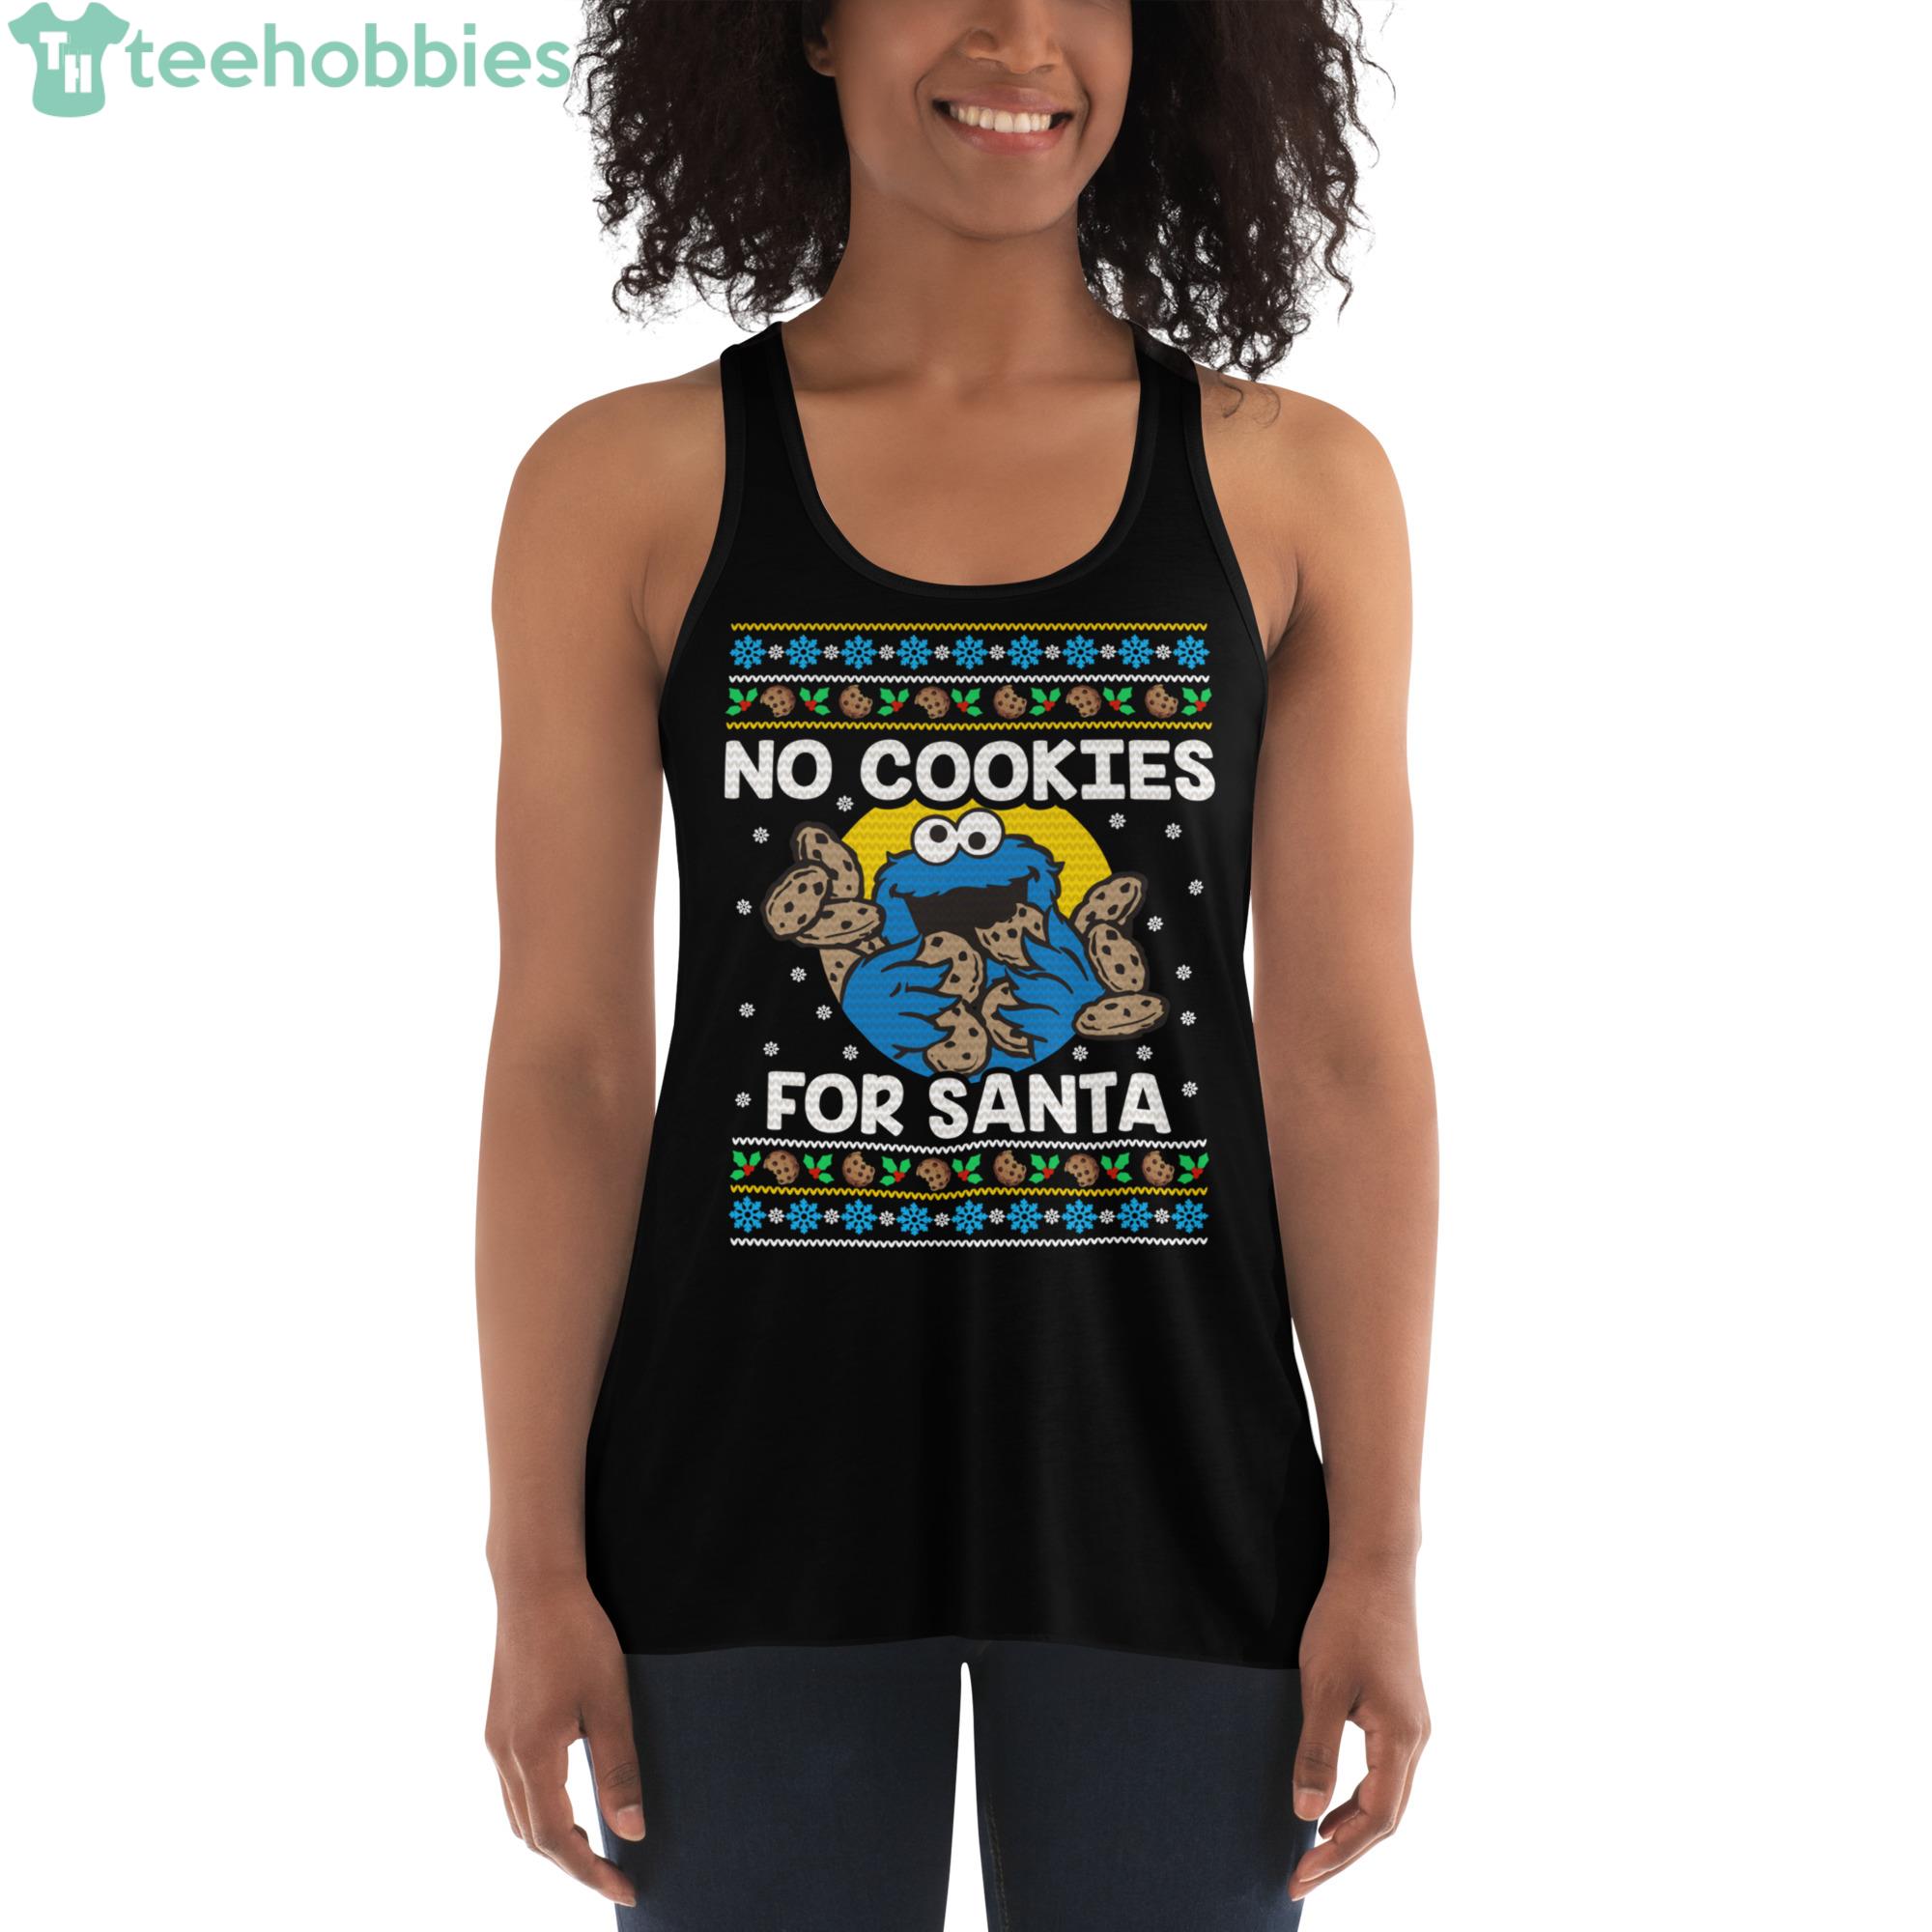 Cookies for Santa- Christmas Gifts under $5 – Think it on a Shirt